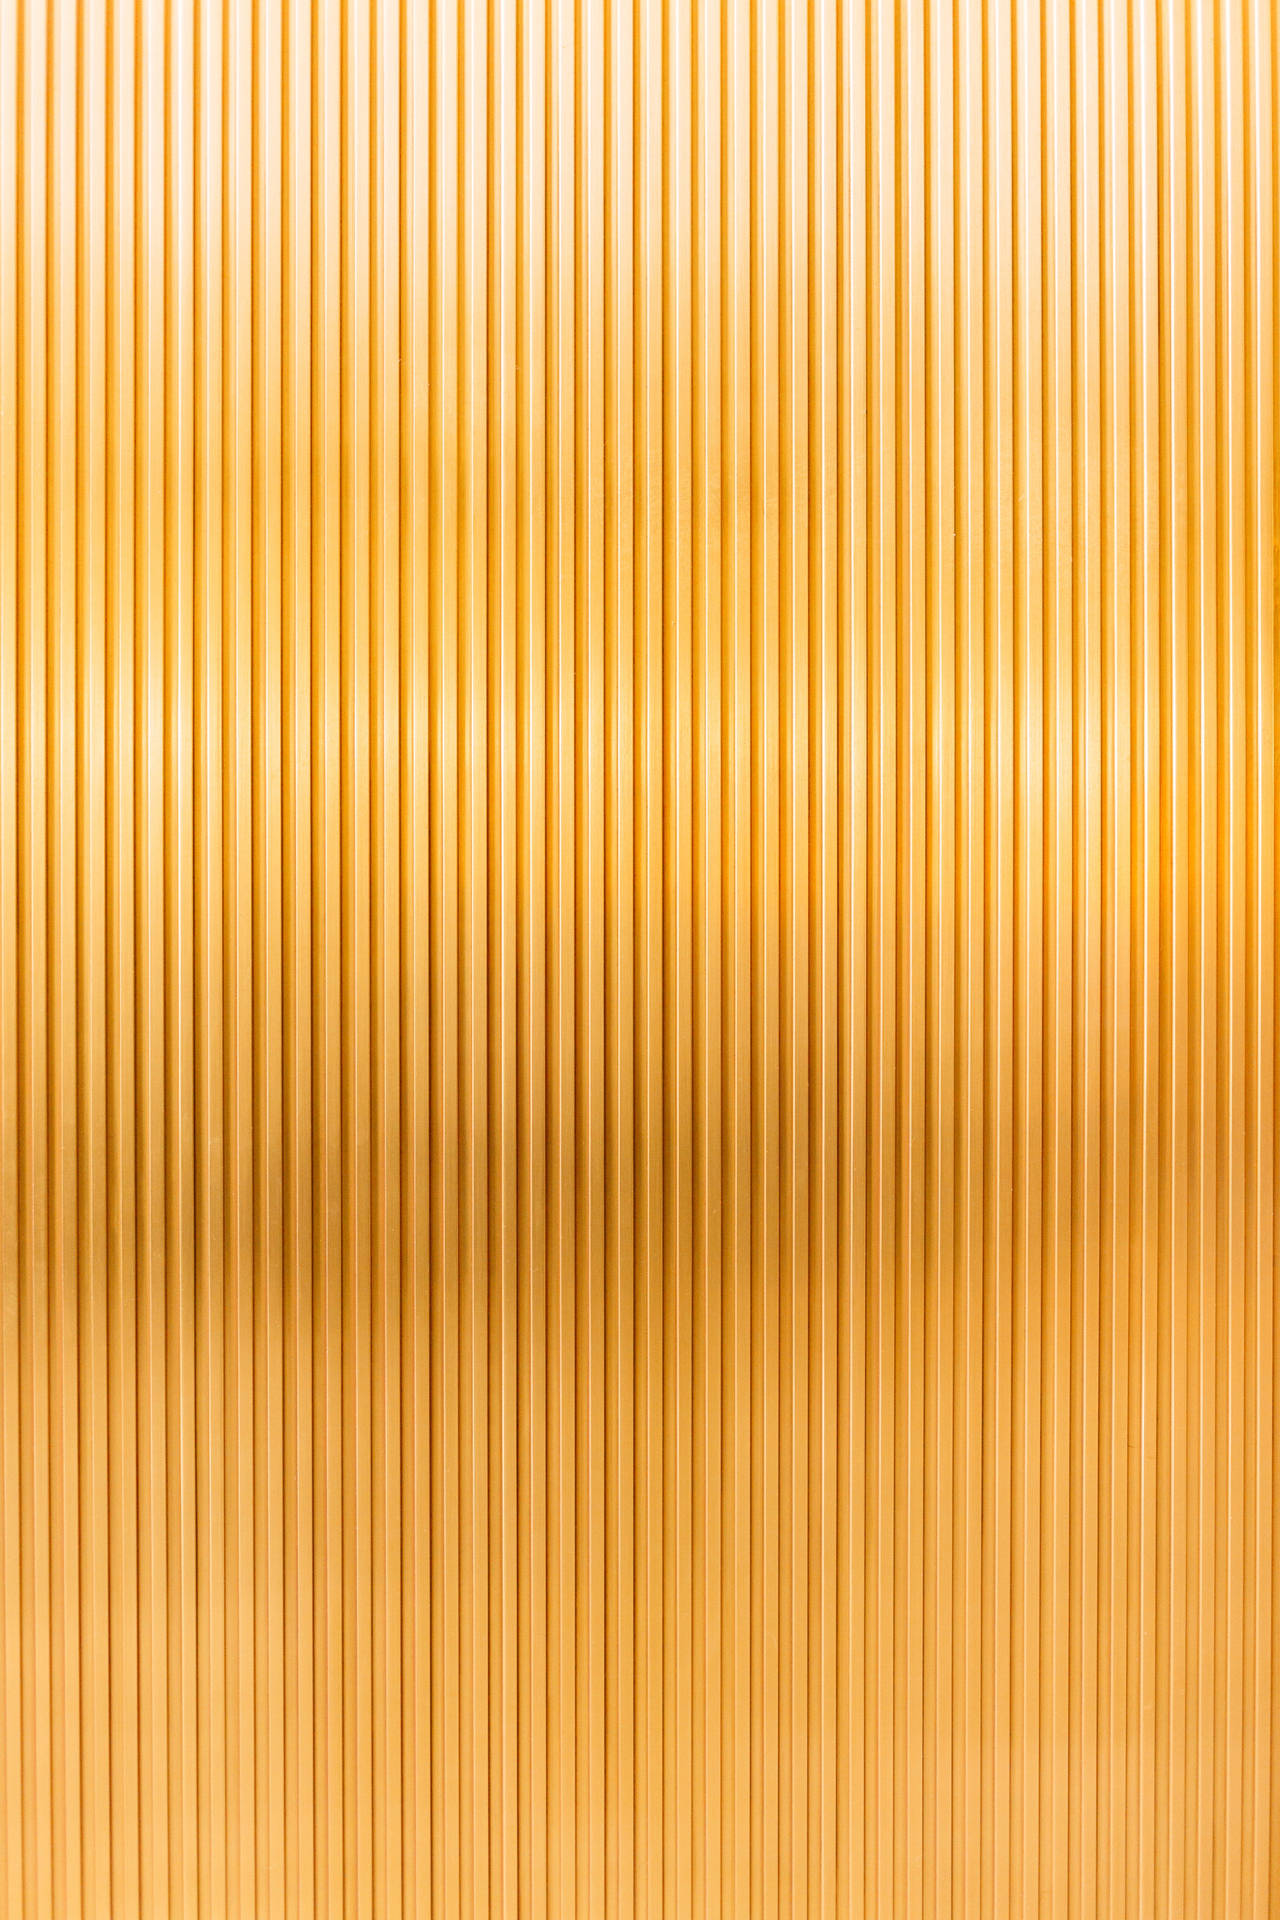 Consistent Vertical Lines In Gold Texture Wallpaper